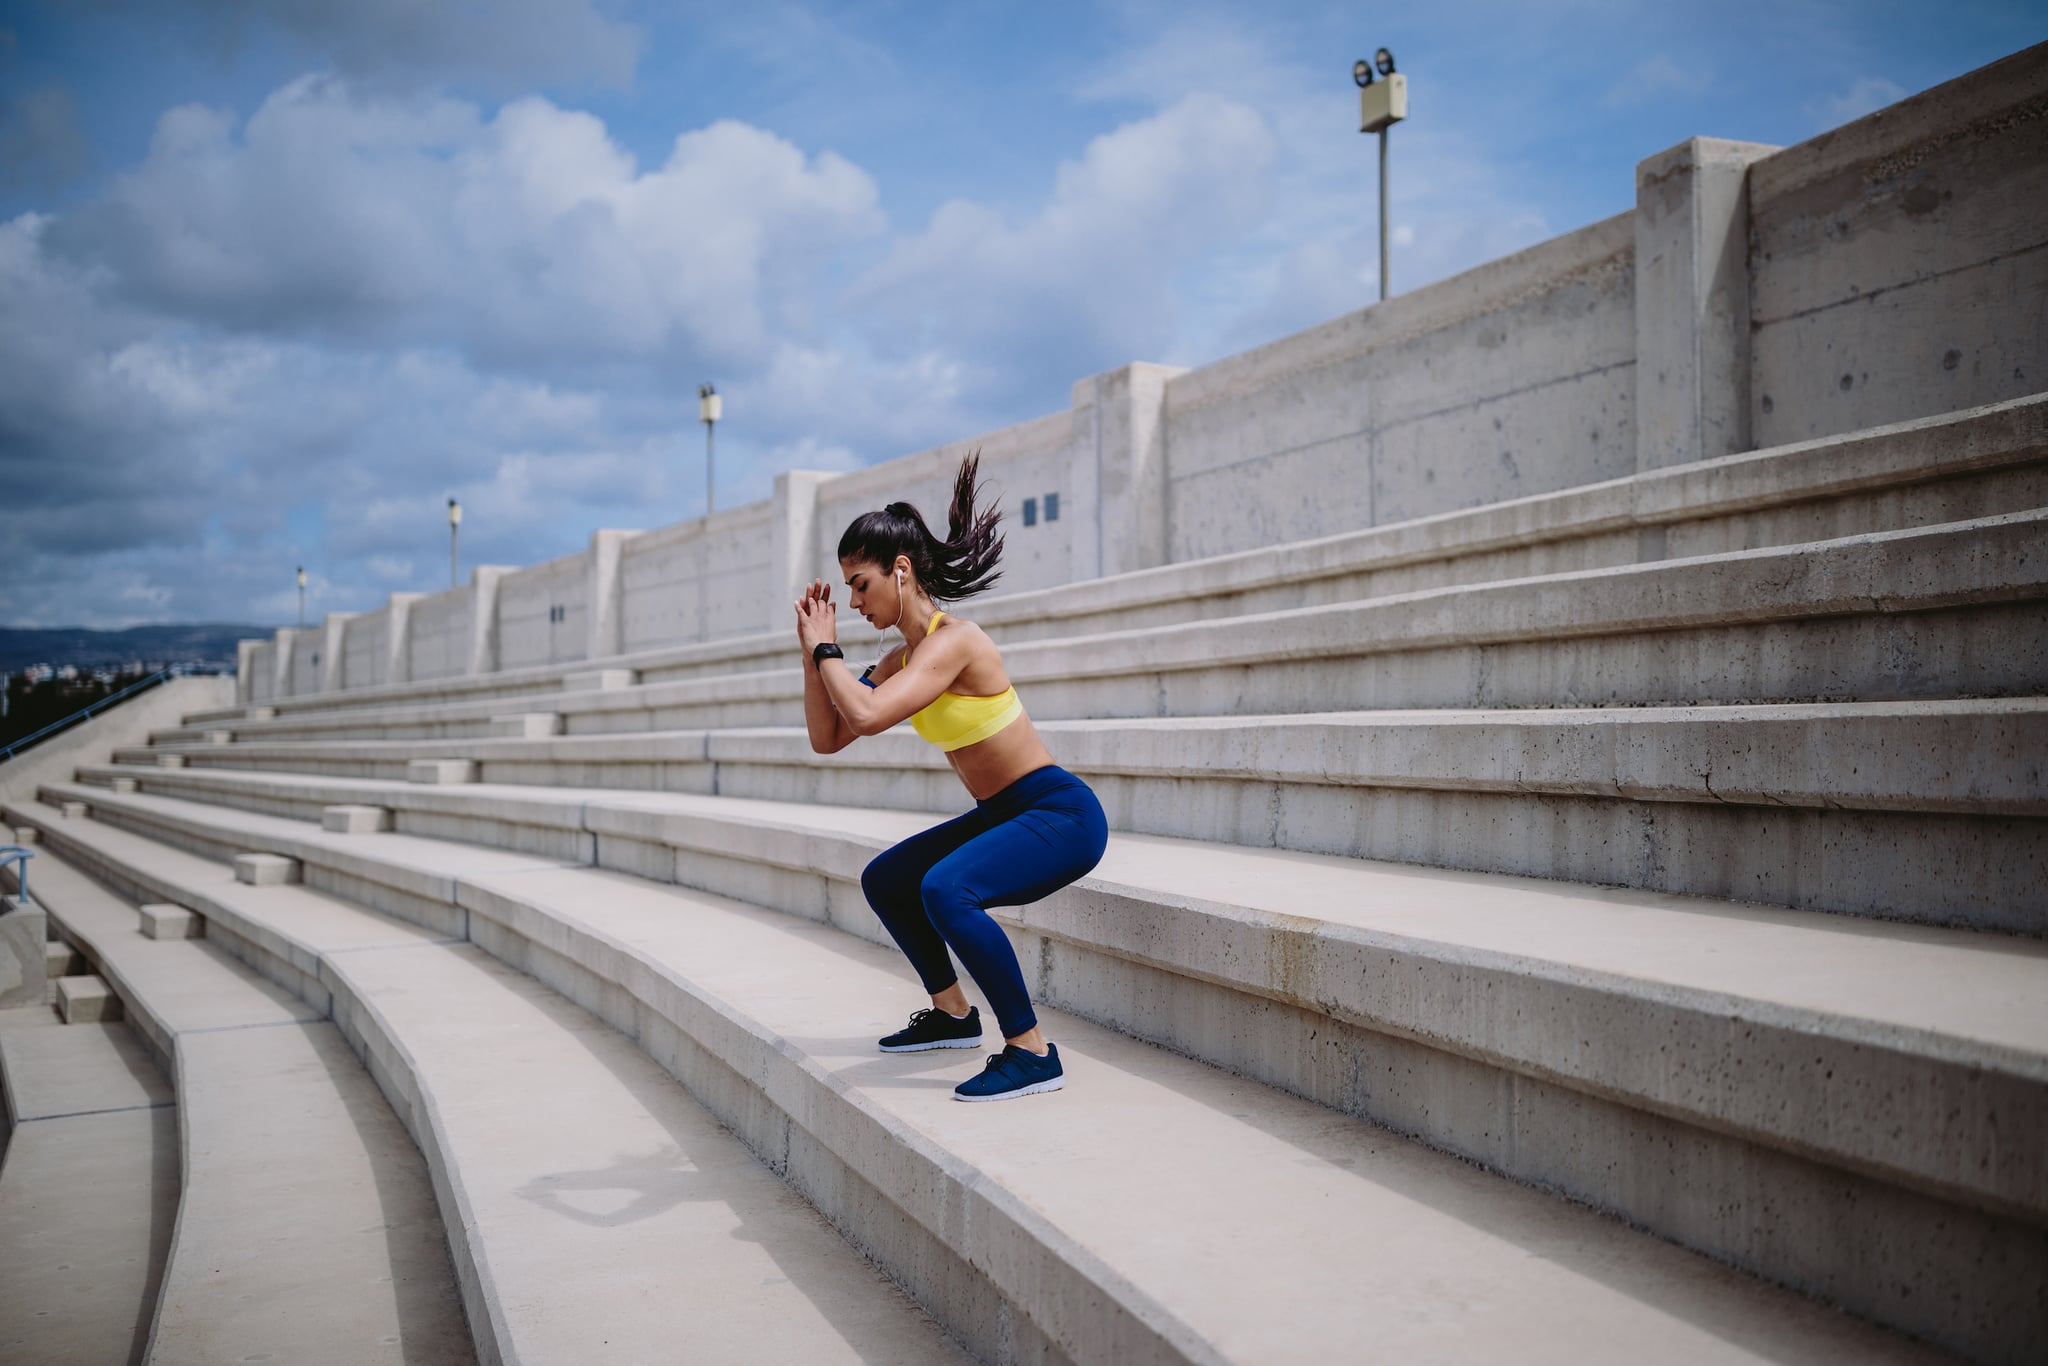 Athletic woman with smartwatch listening to music and doing jump squats on urban stadium stands